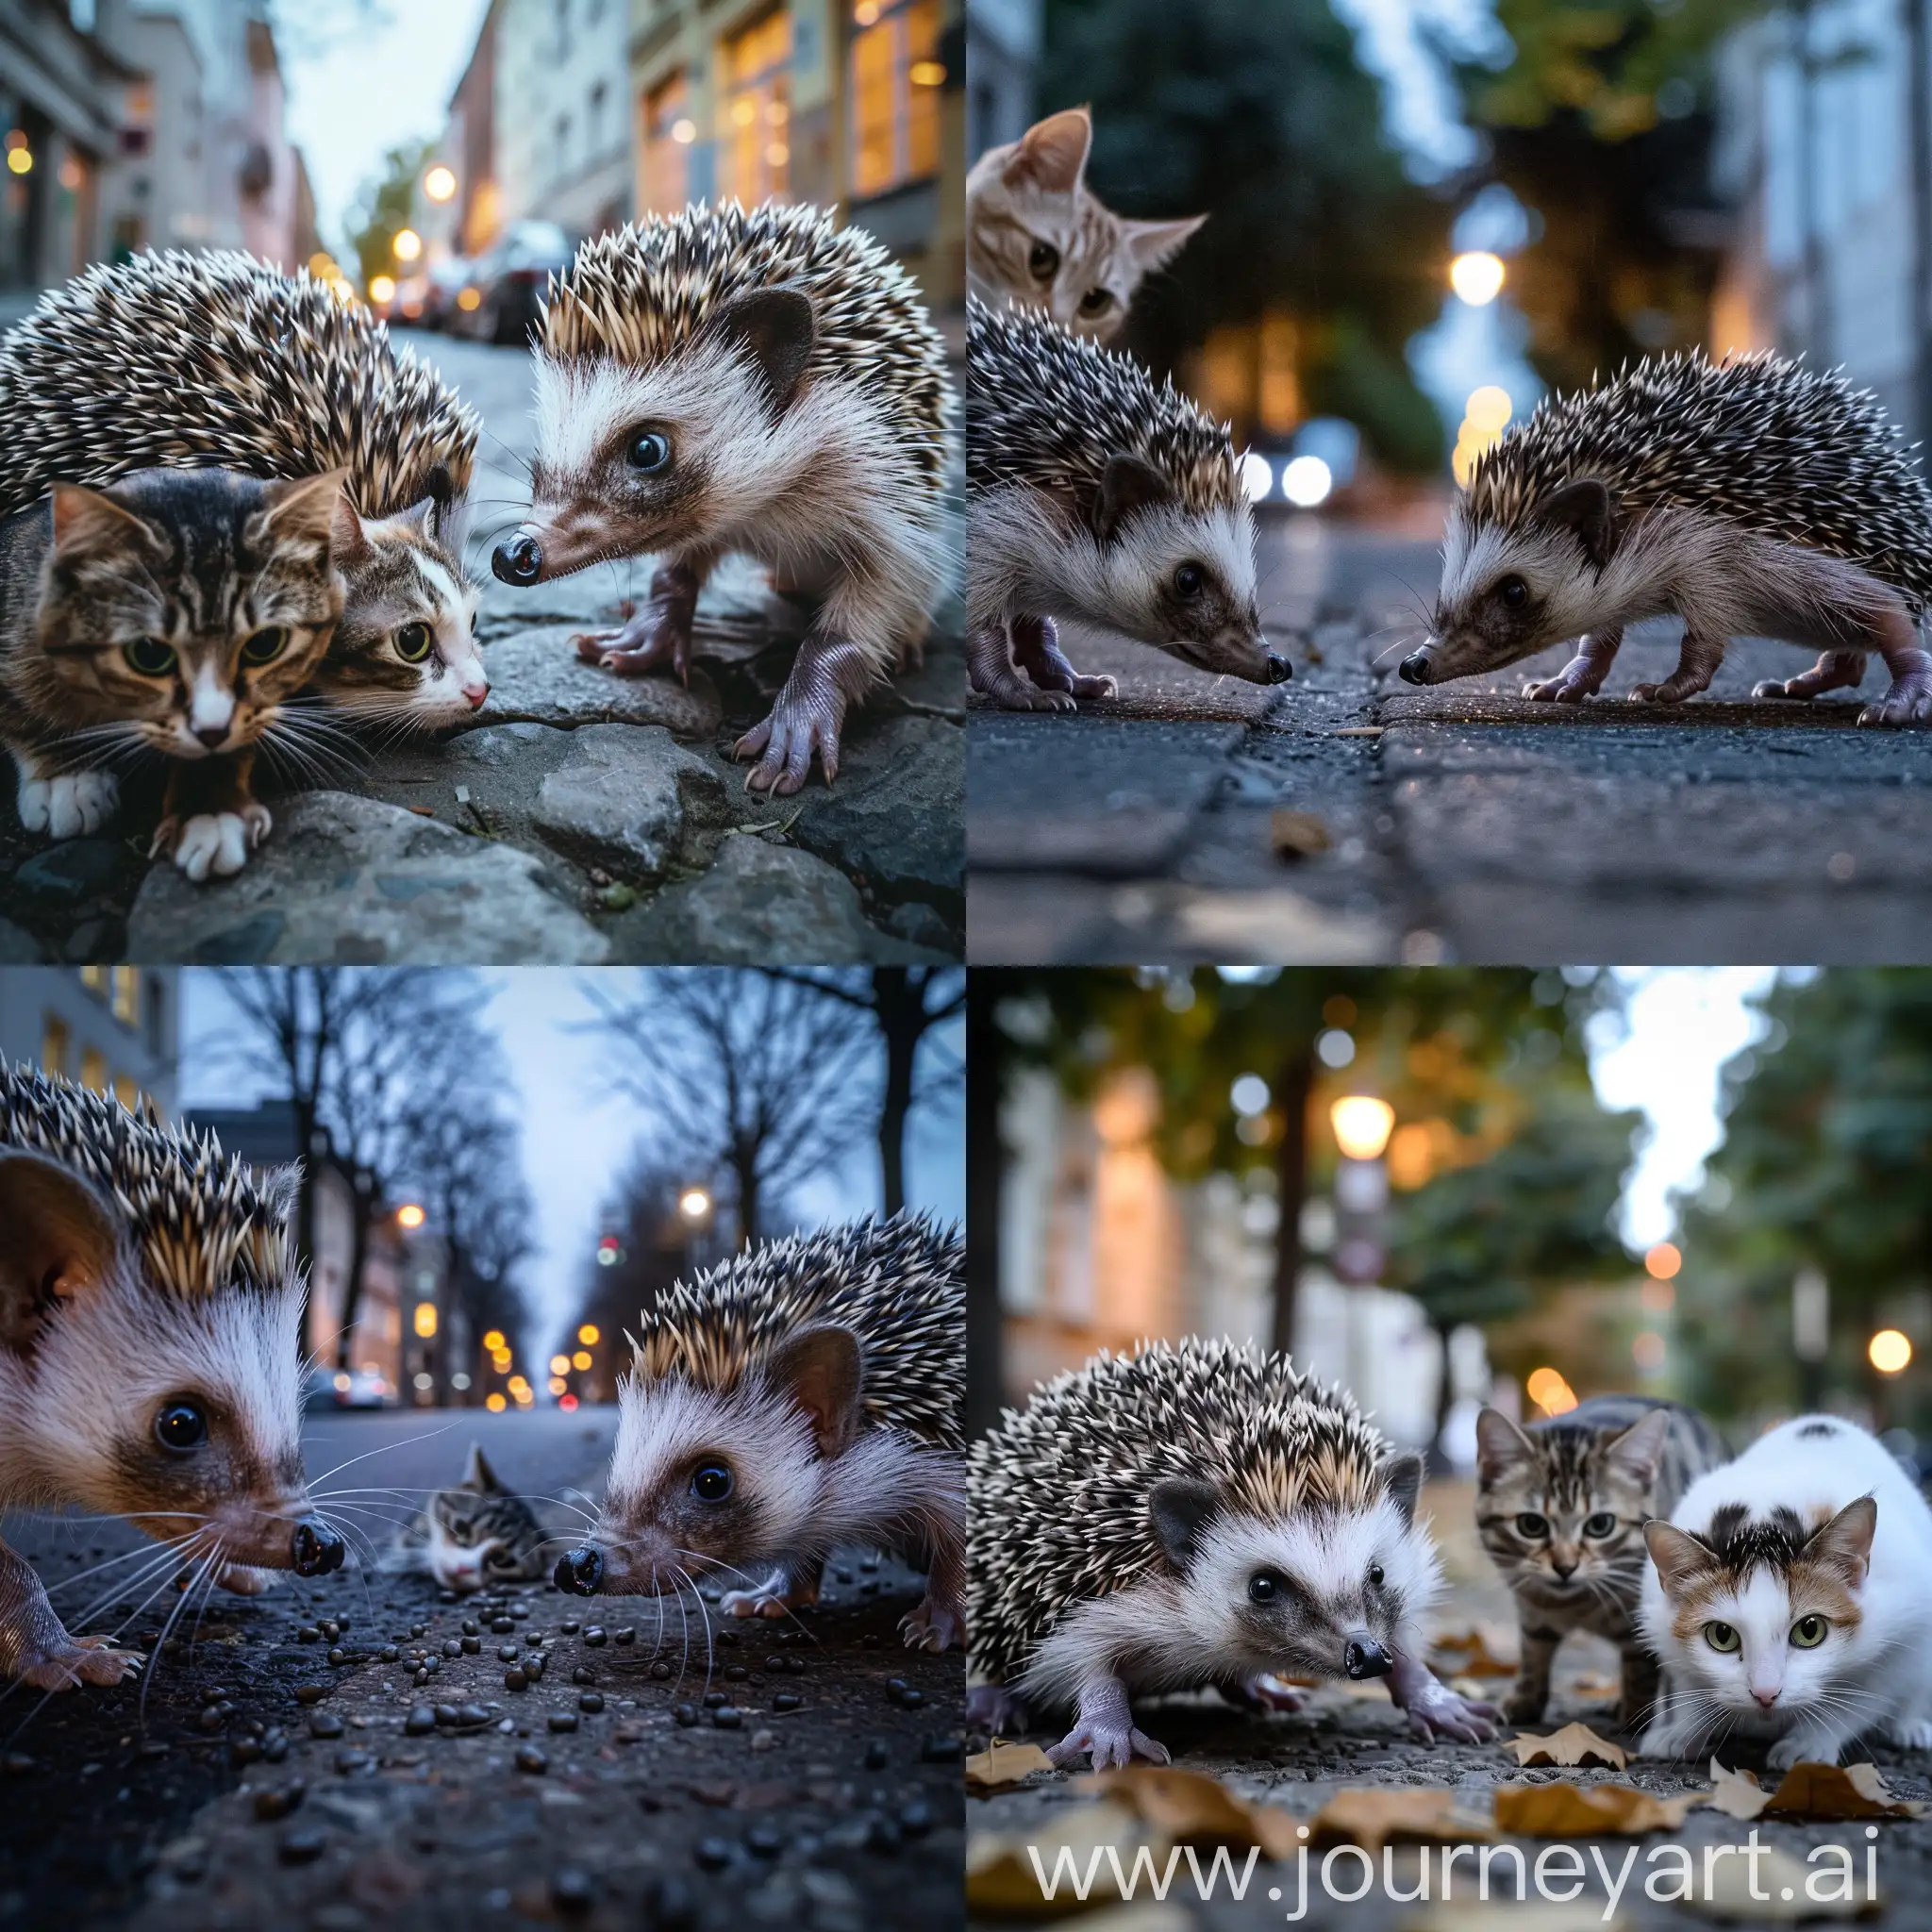 Twilight-in-Berlin-Hedgehogs-and-Cats-Roaming-the-Streets